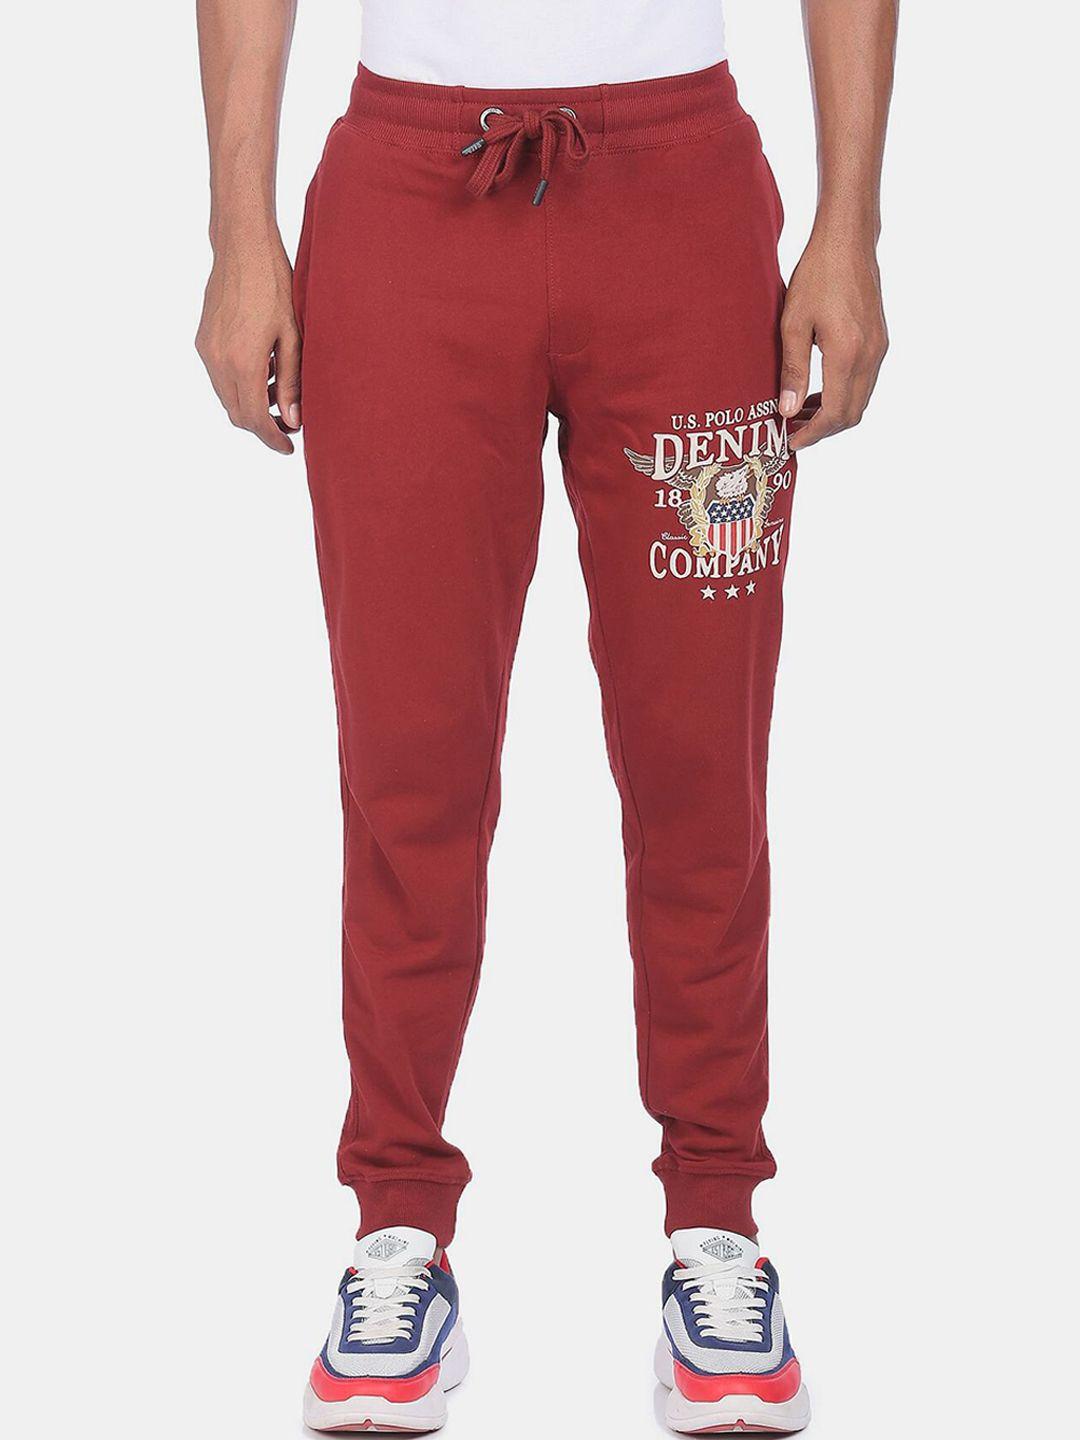 u.s.-polo-assn.-denim-co.-men-maroon-solid-straight-fit-joggers